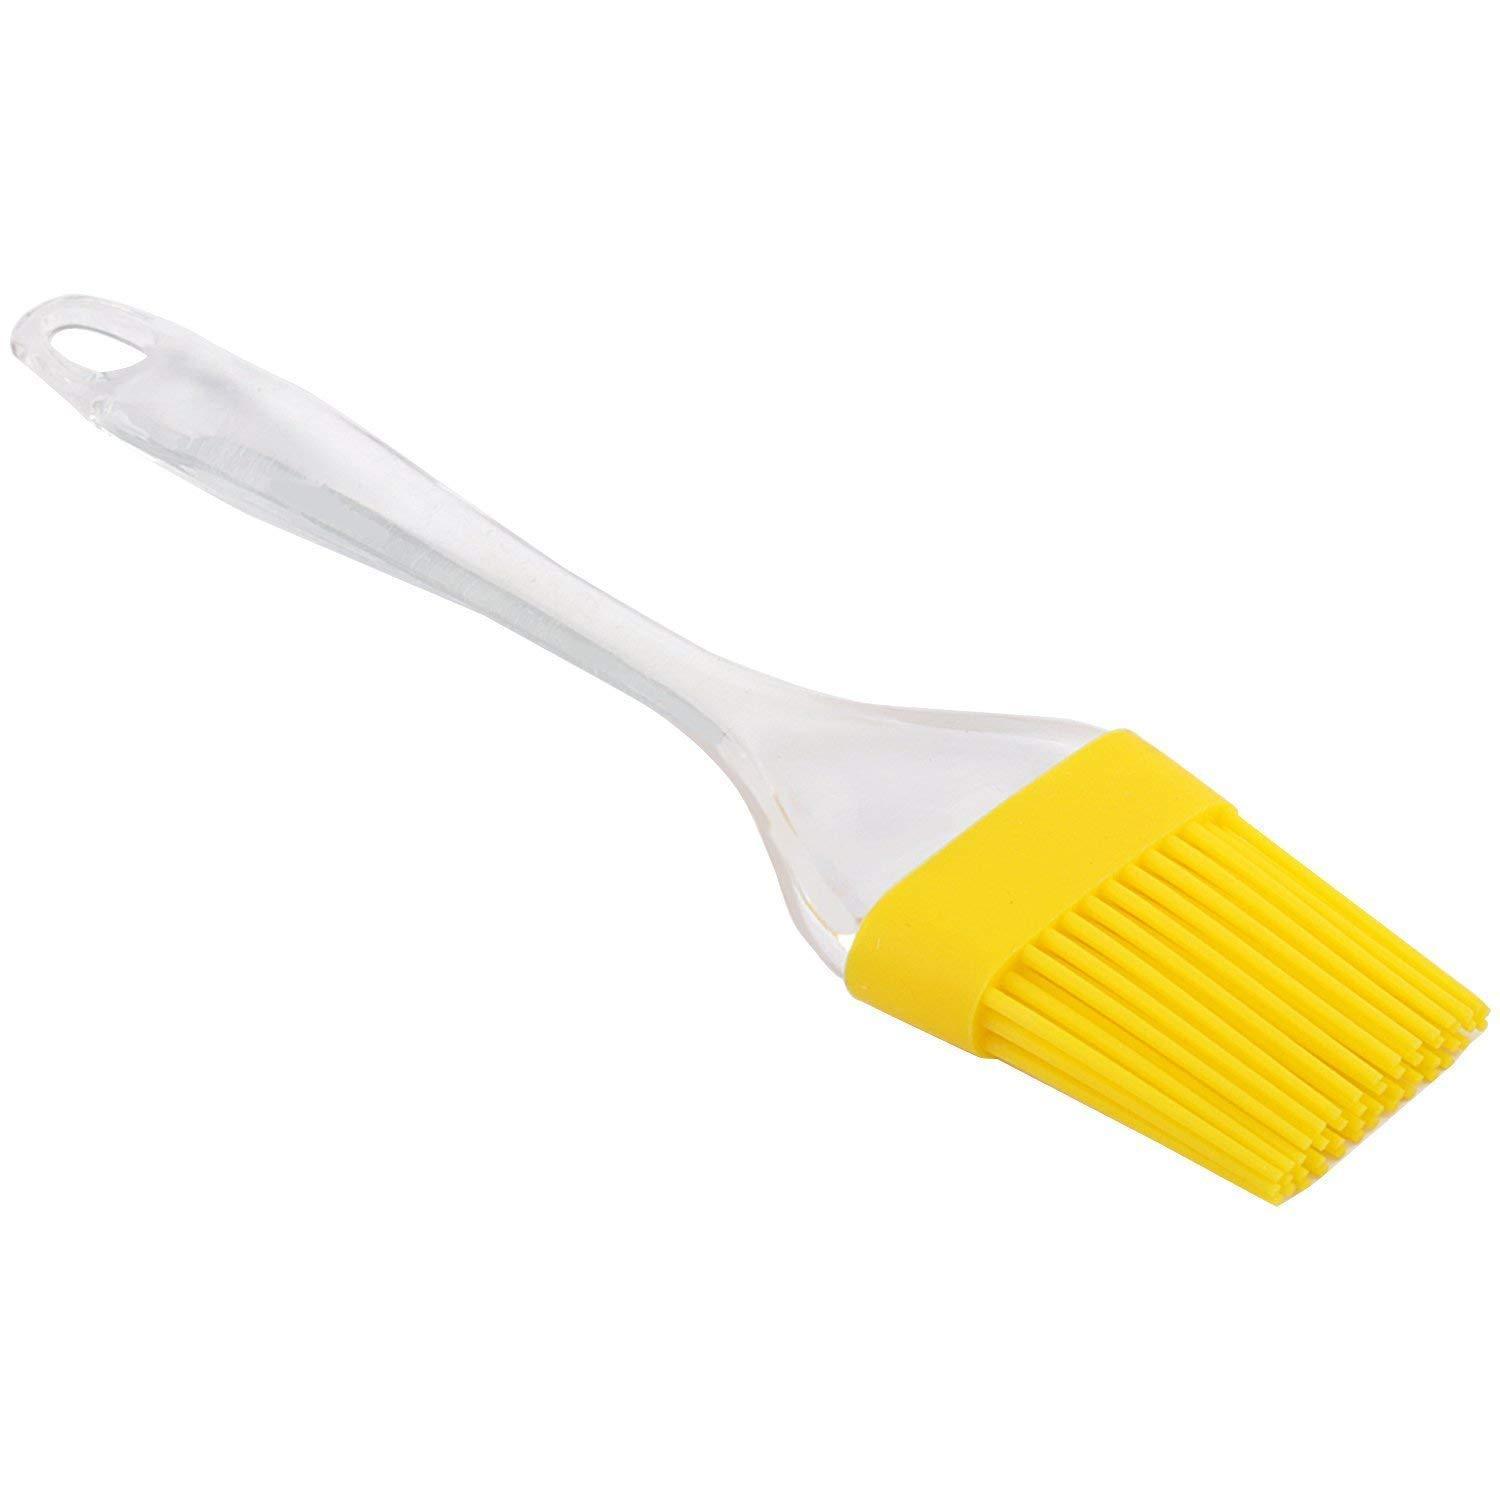 Silicone Spatula and Pastry Brush In Pakistan